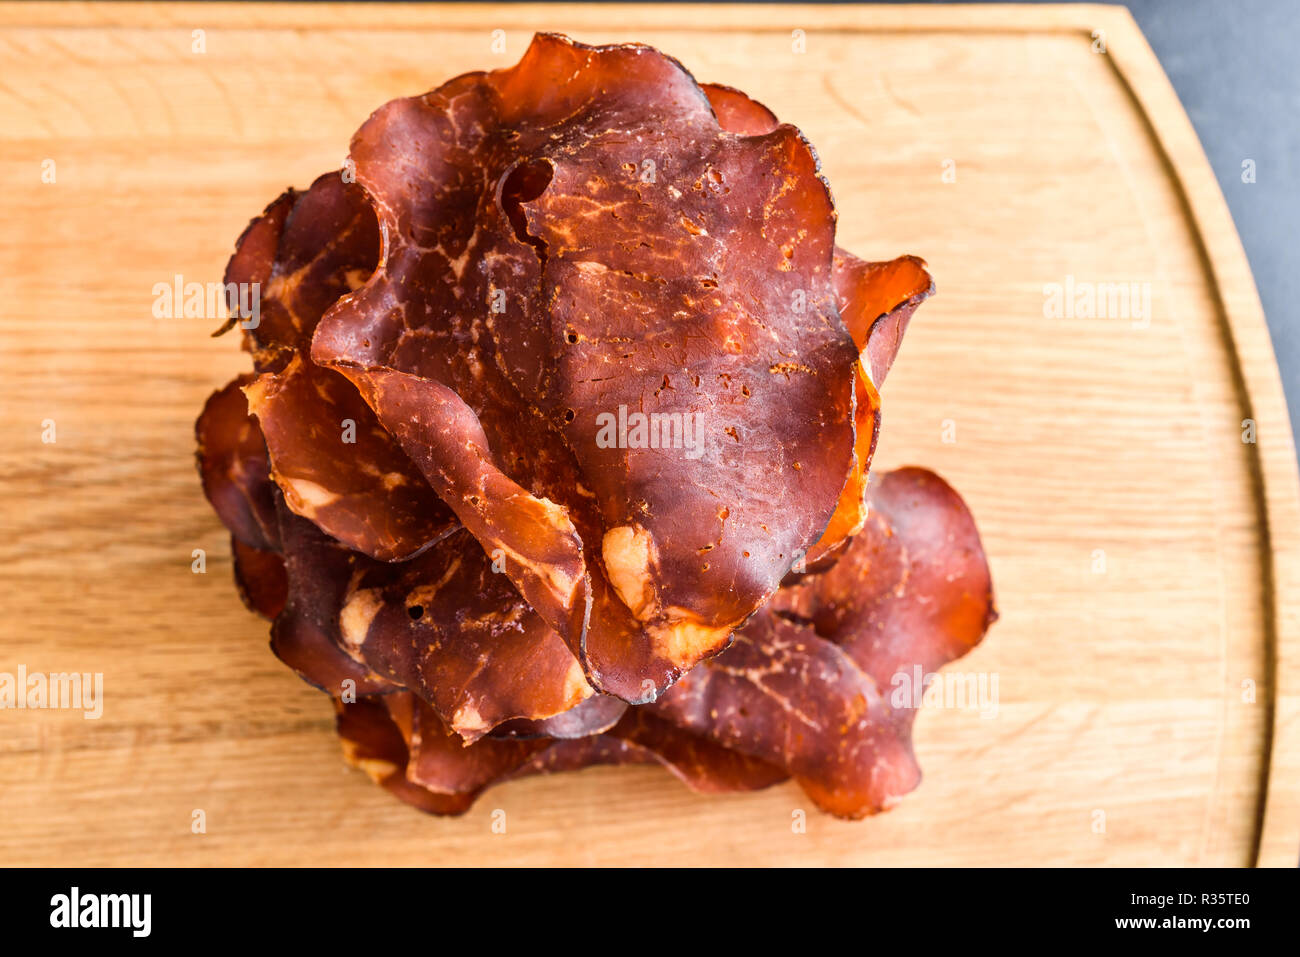 Thinly sliced and dried smoked ham on oak tray. Small crystals of salt visible on the meat. Stock Photo